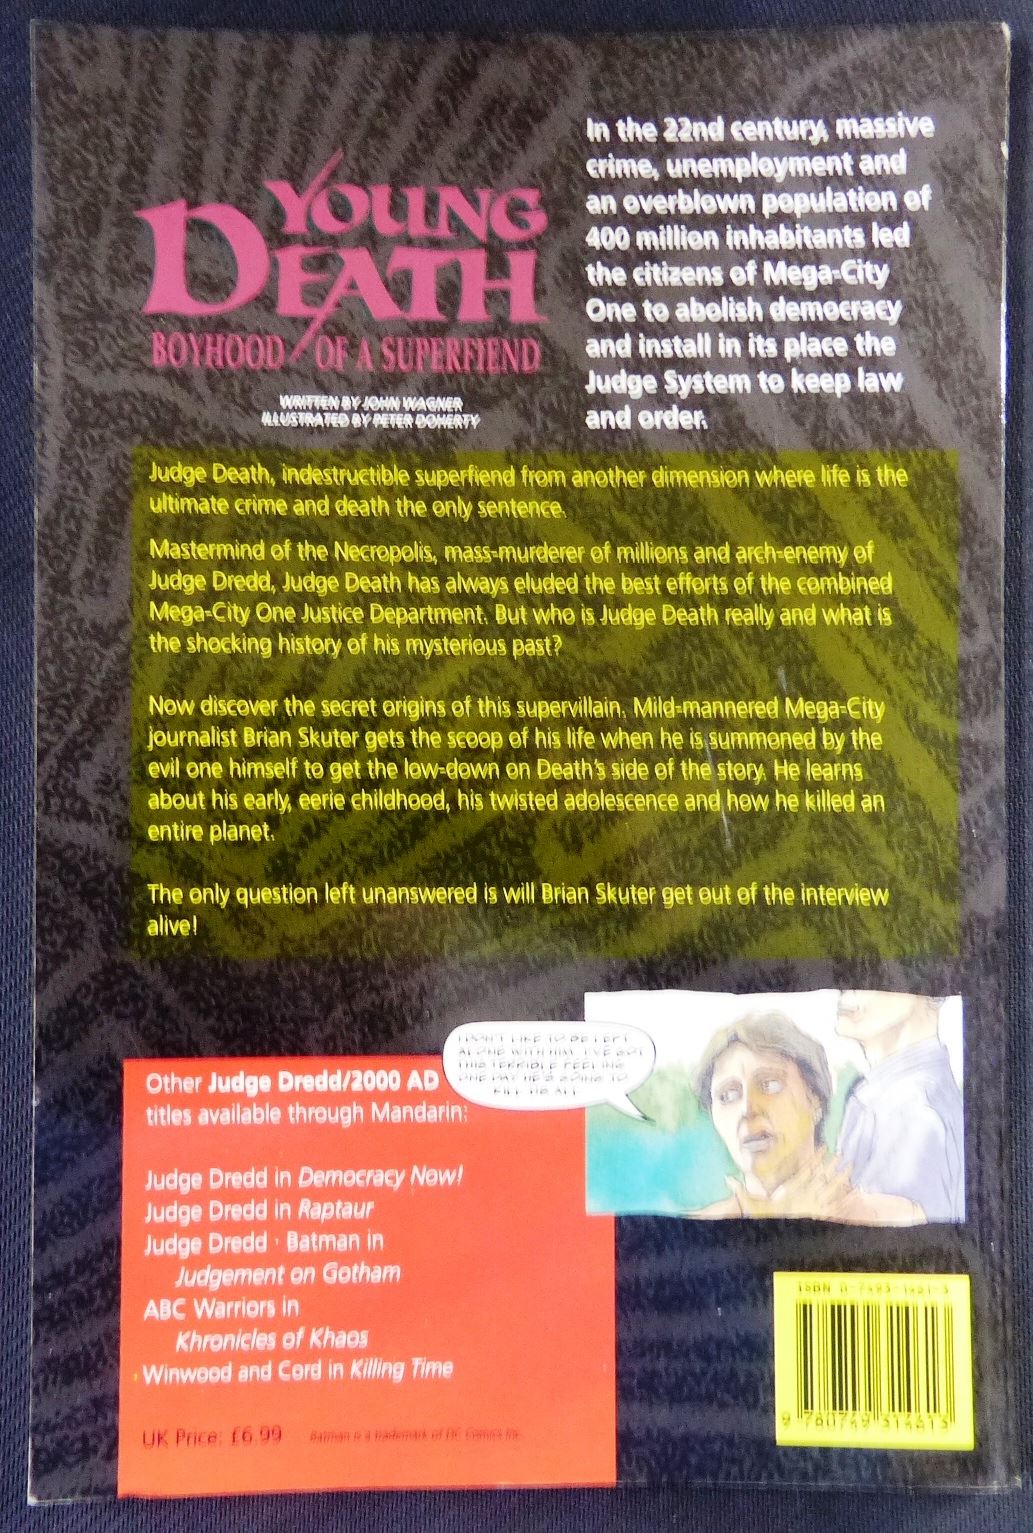 Young Death: Boyhood of a Superfriend - Graphic Novel - 2000 AD #1MD